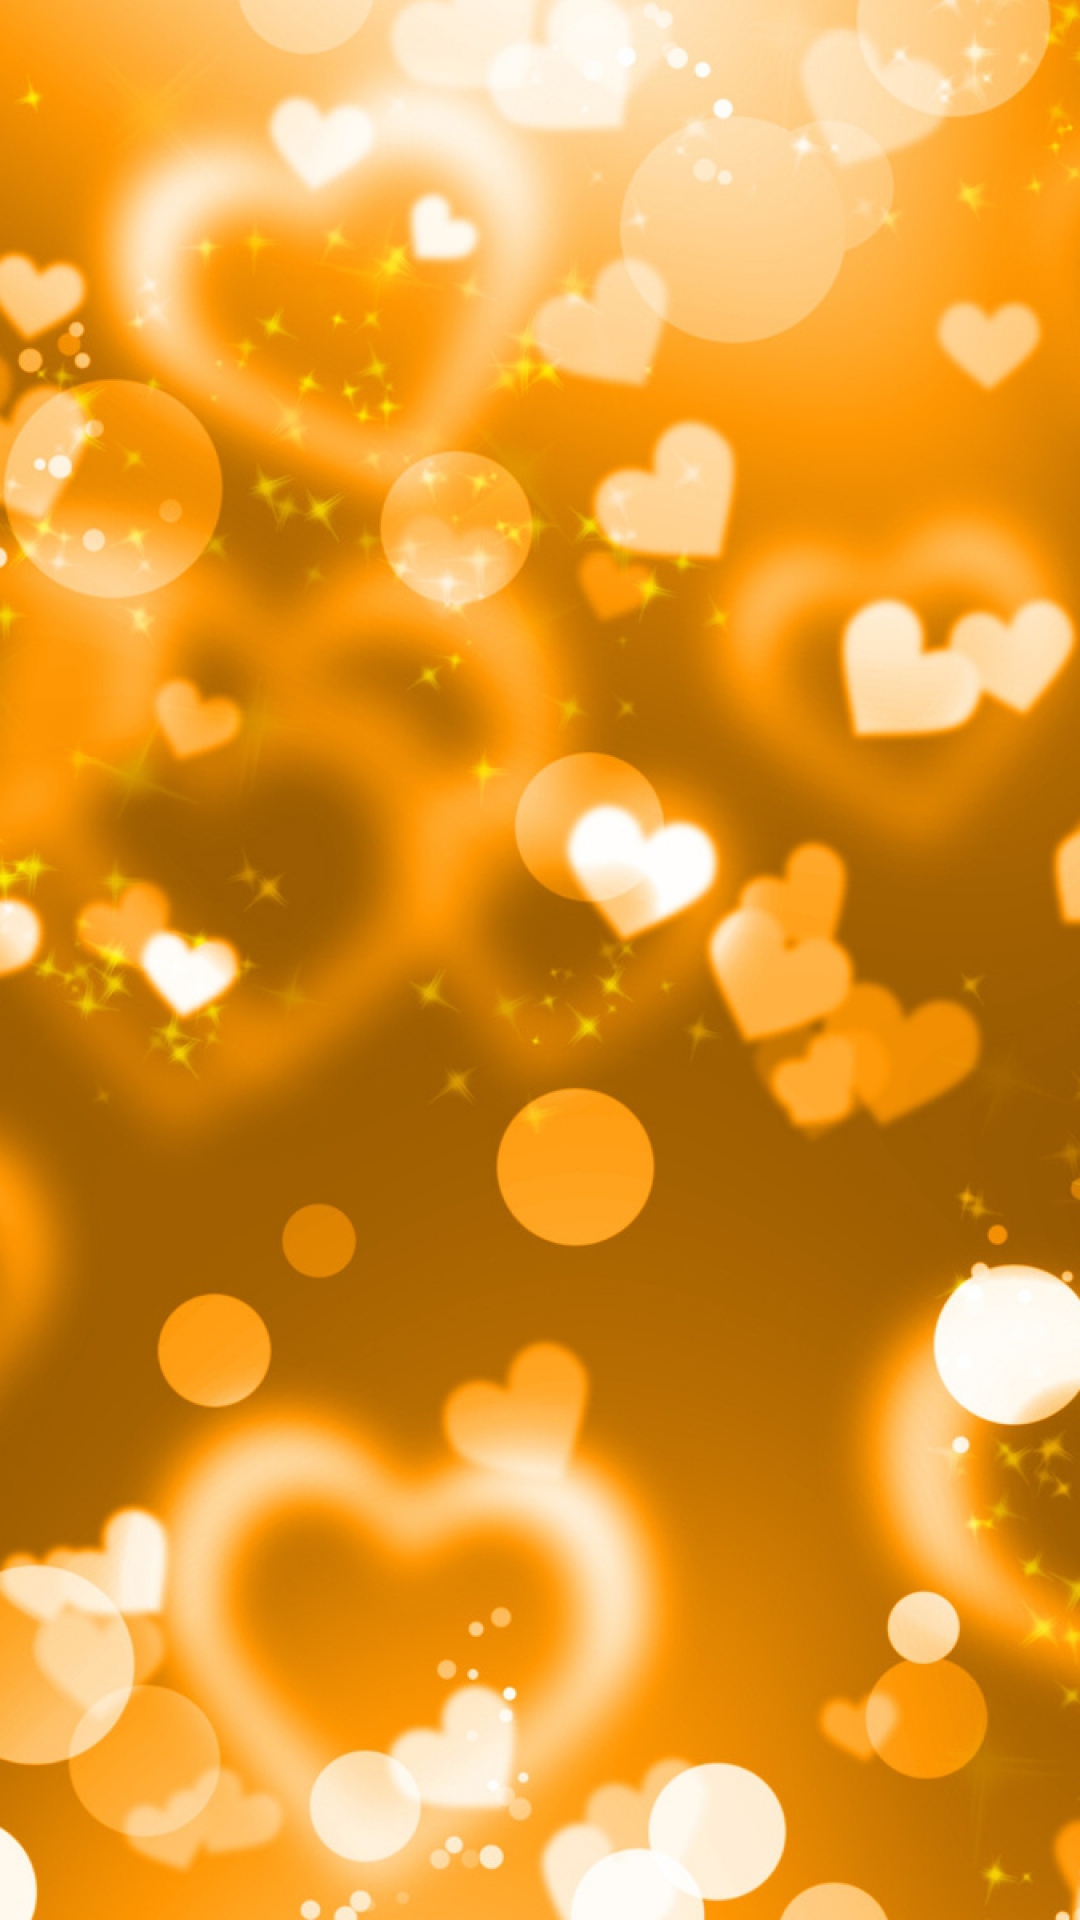 Gold Heart Girly Iphone Wallpapers Iphone Wallpaper